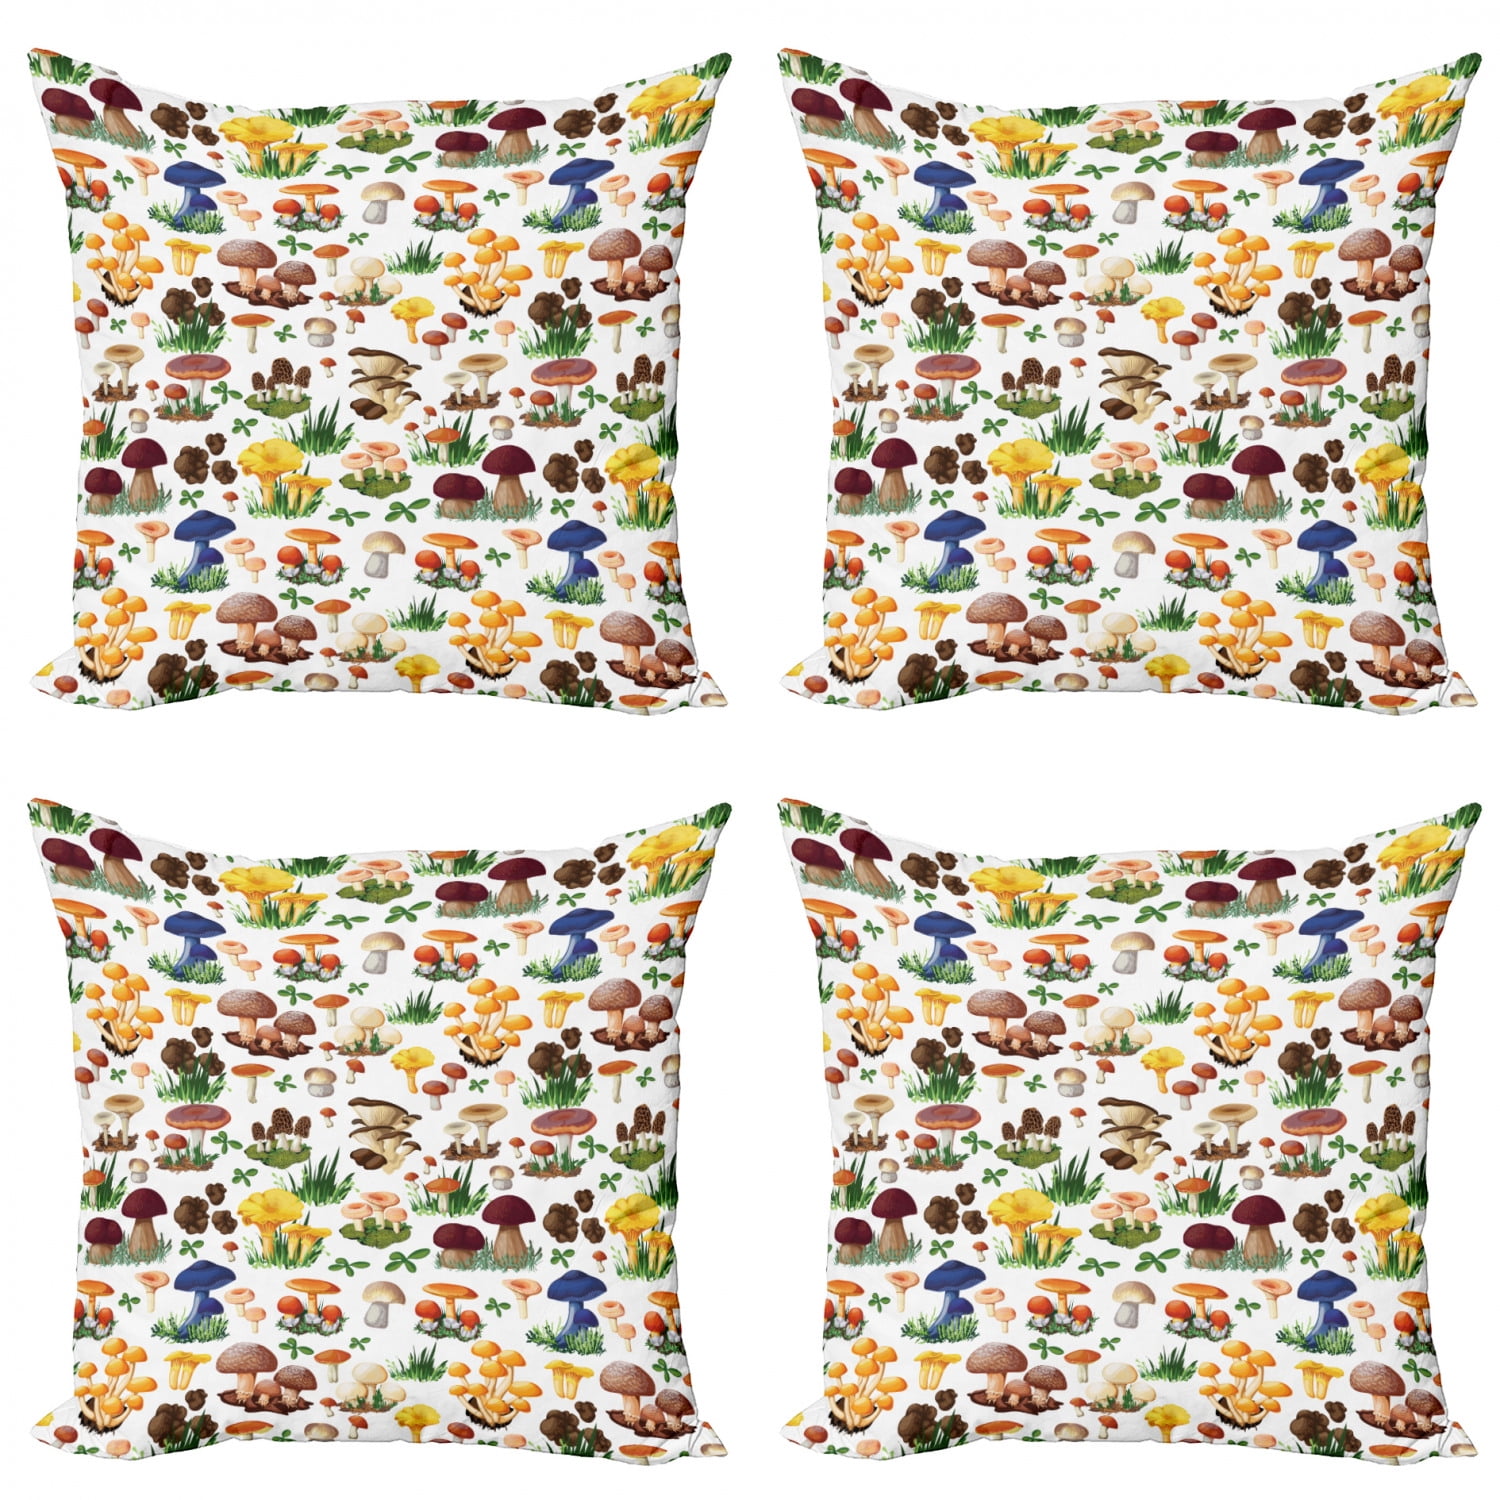 Easternproject Throw Pillow Cases 4 Pack Mushroom Agaric Lotus Leaves Spring Home Decor Throw Pillow Cover Super Soft Square 18x18 Inch Plants Cushion Cover for Outdoor Sofa Couch